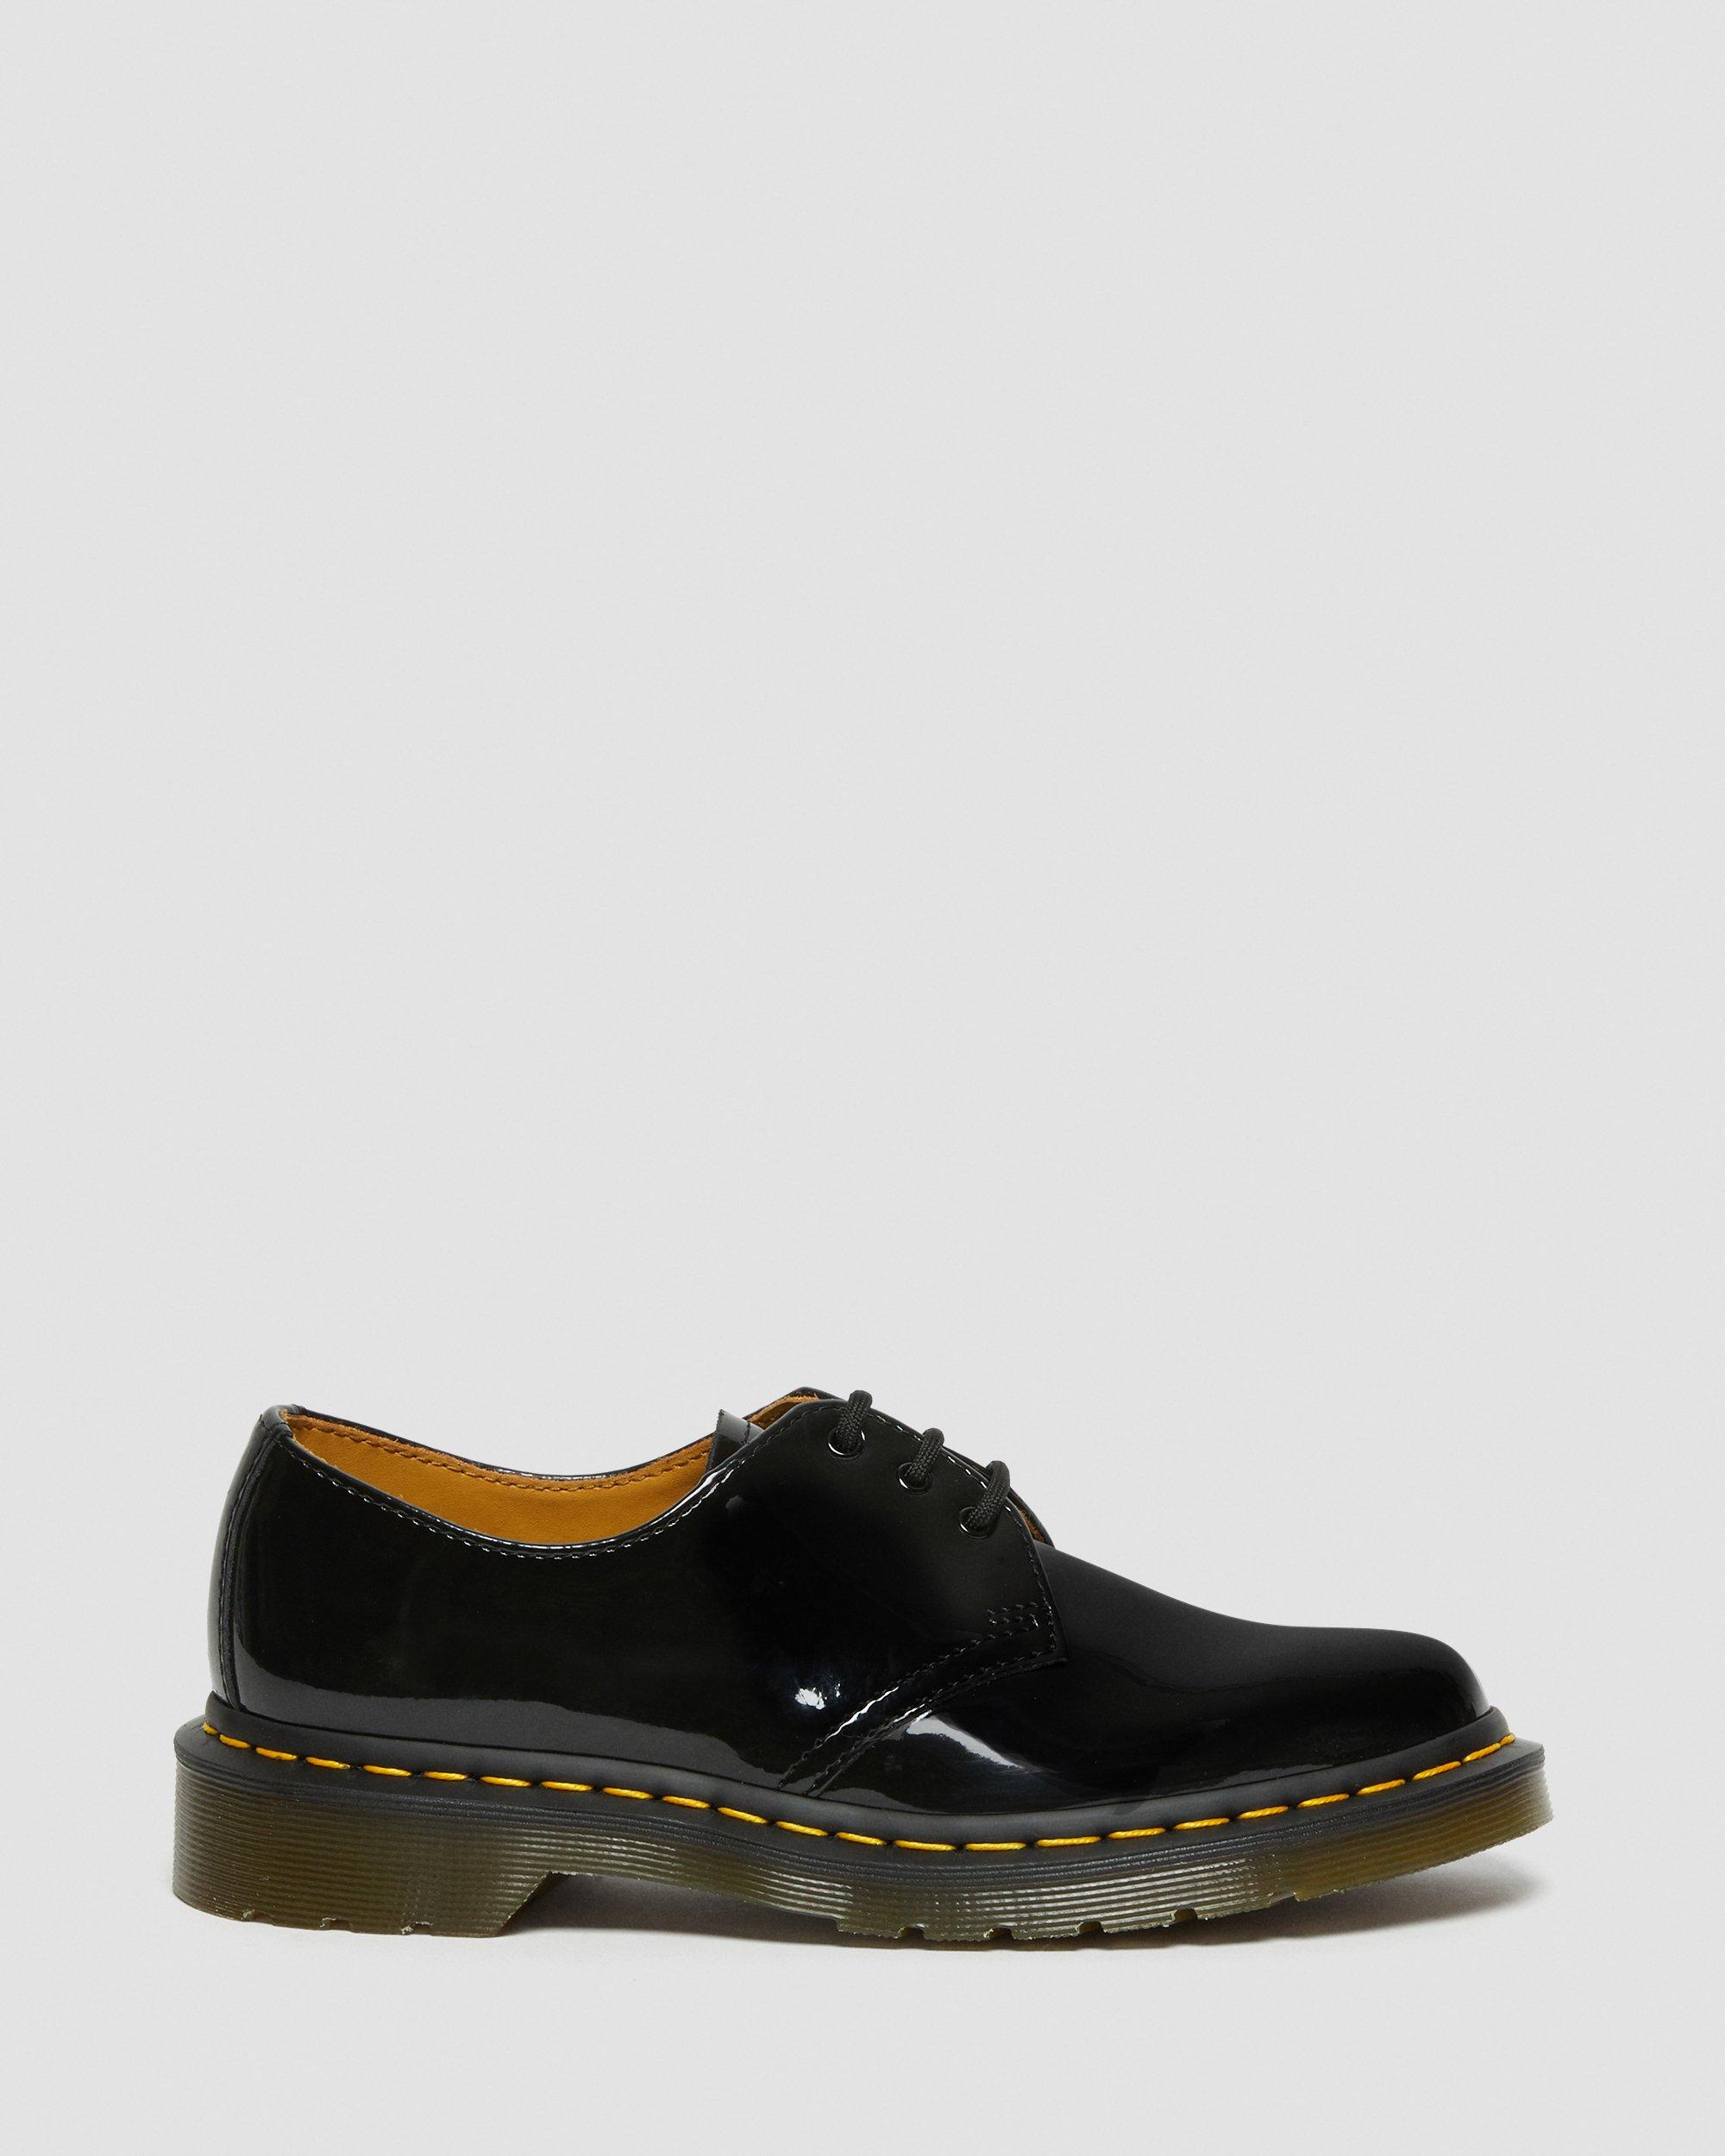 1461 WOMEN'S PATENT LEATHER OXFORD SHOES | Dr. Martens